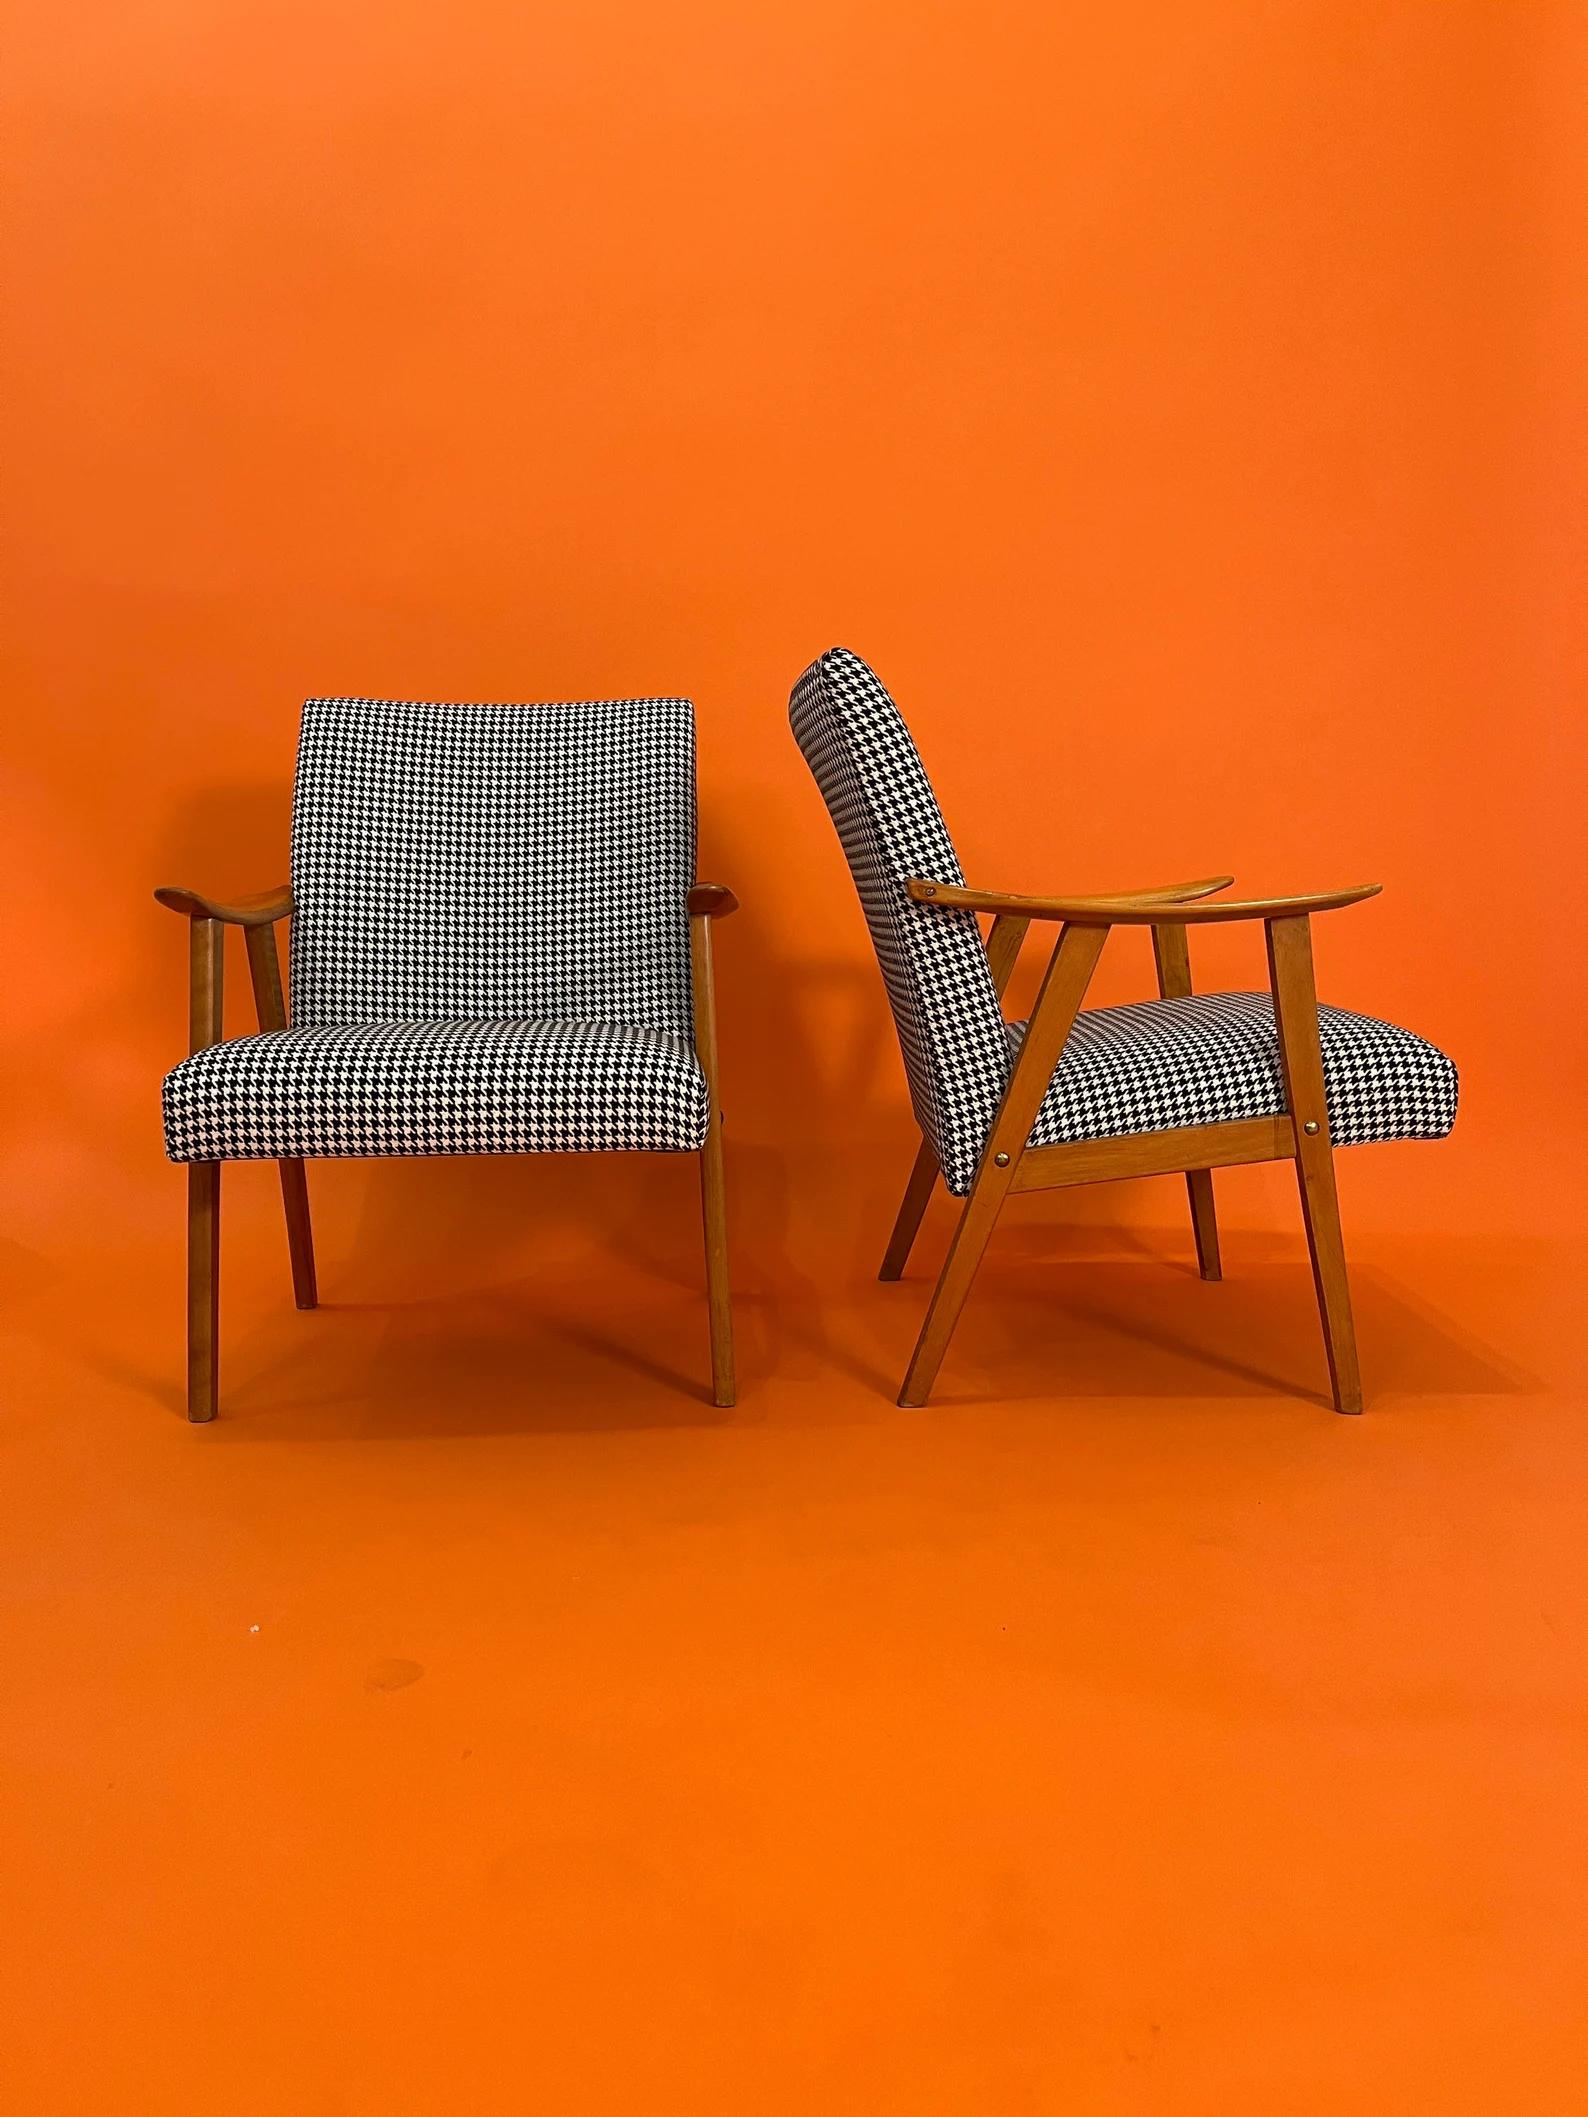 Curated, mid century, Swedish pair of Office / dining / lounge chairs with new houndstooth Upholstery 1960s Circa
Dimensions: 
Arm to Arm: 25 inches 
Interior deep: 19 inches 
Exterior Deep: 25 inches 
Arms height: 22 inches 
Seat height: 16